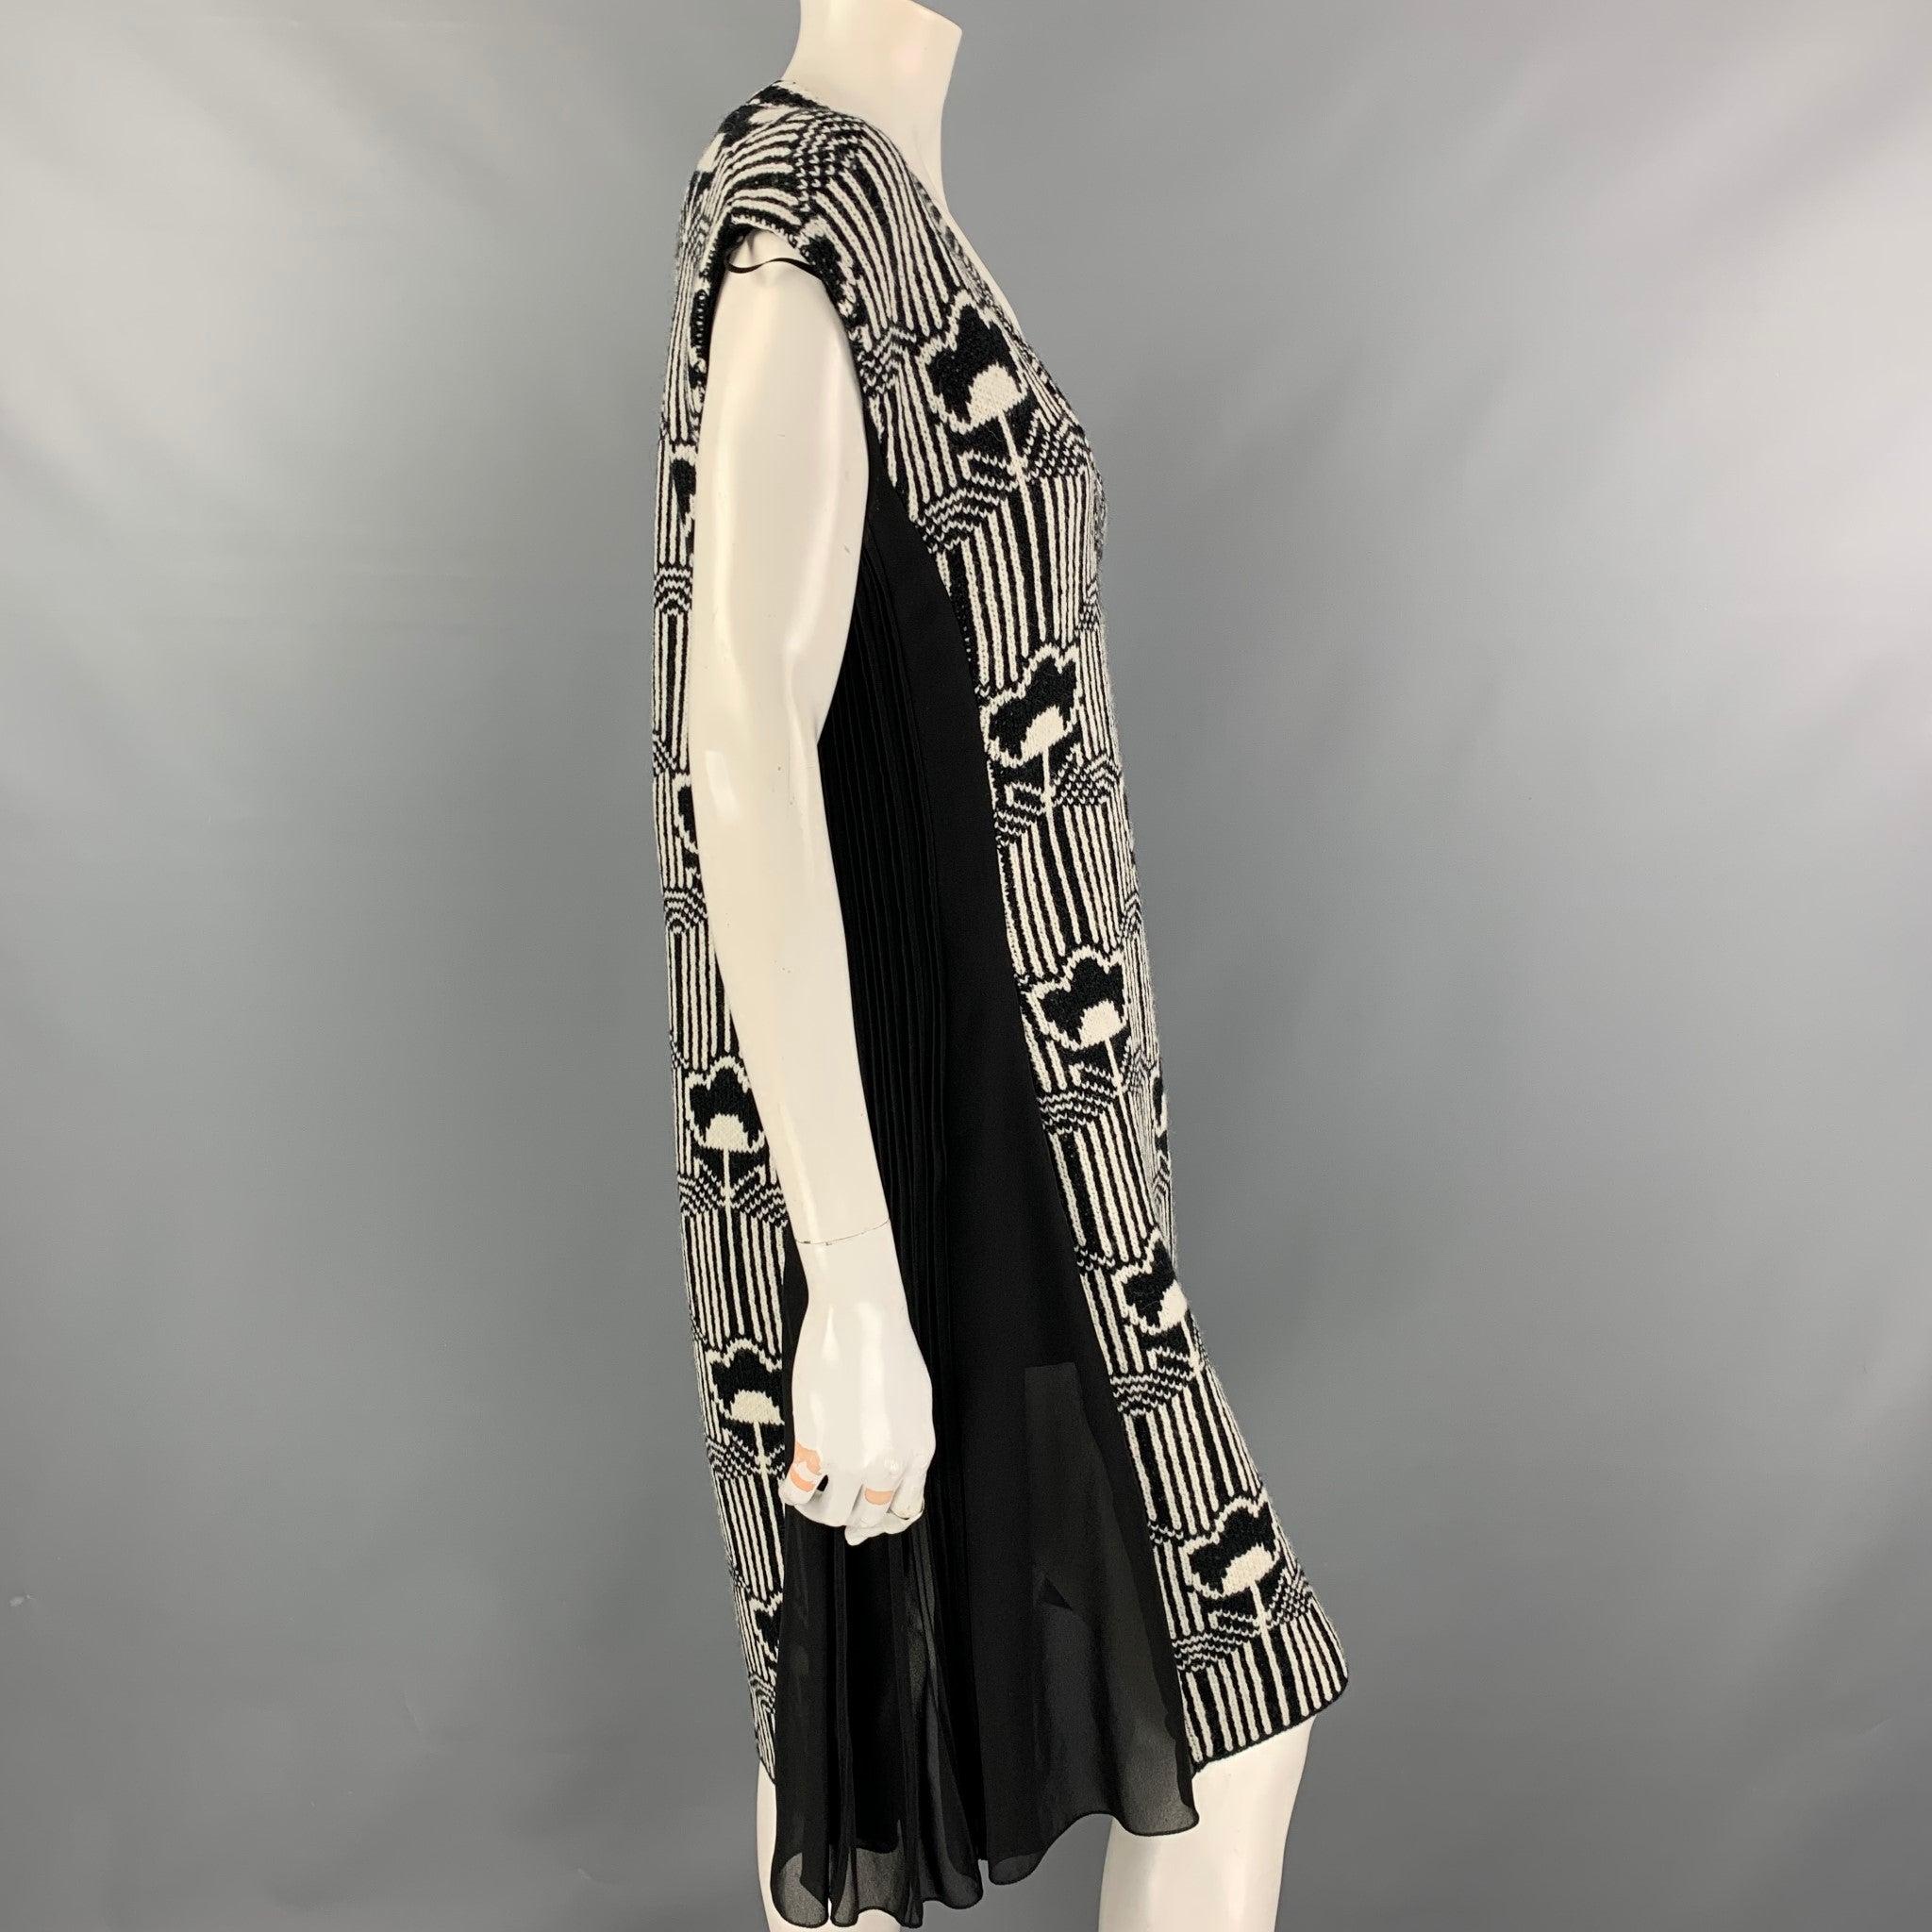 PRADA Fall '21 Size 2 Black & White Floral Crepe Wool/Silk Knitted V-Neck Dress In Excellent Condition For Sale In San Francisco, CA